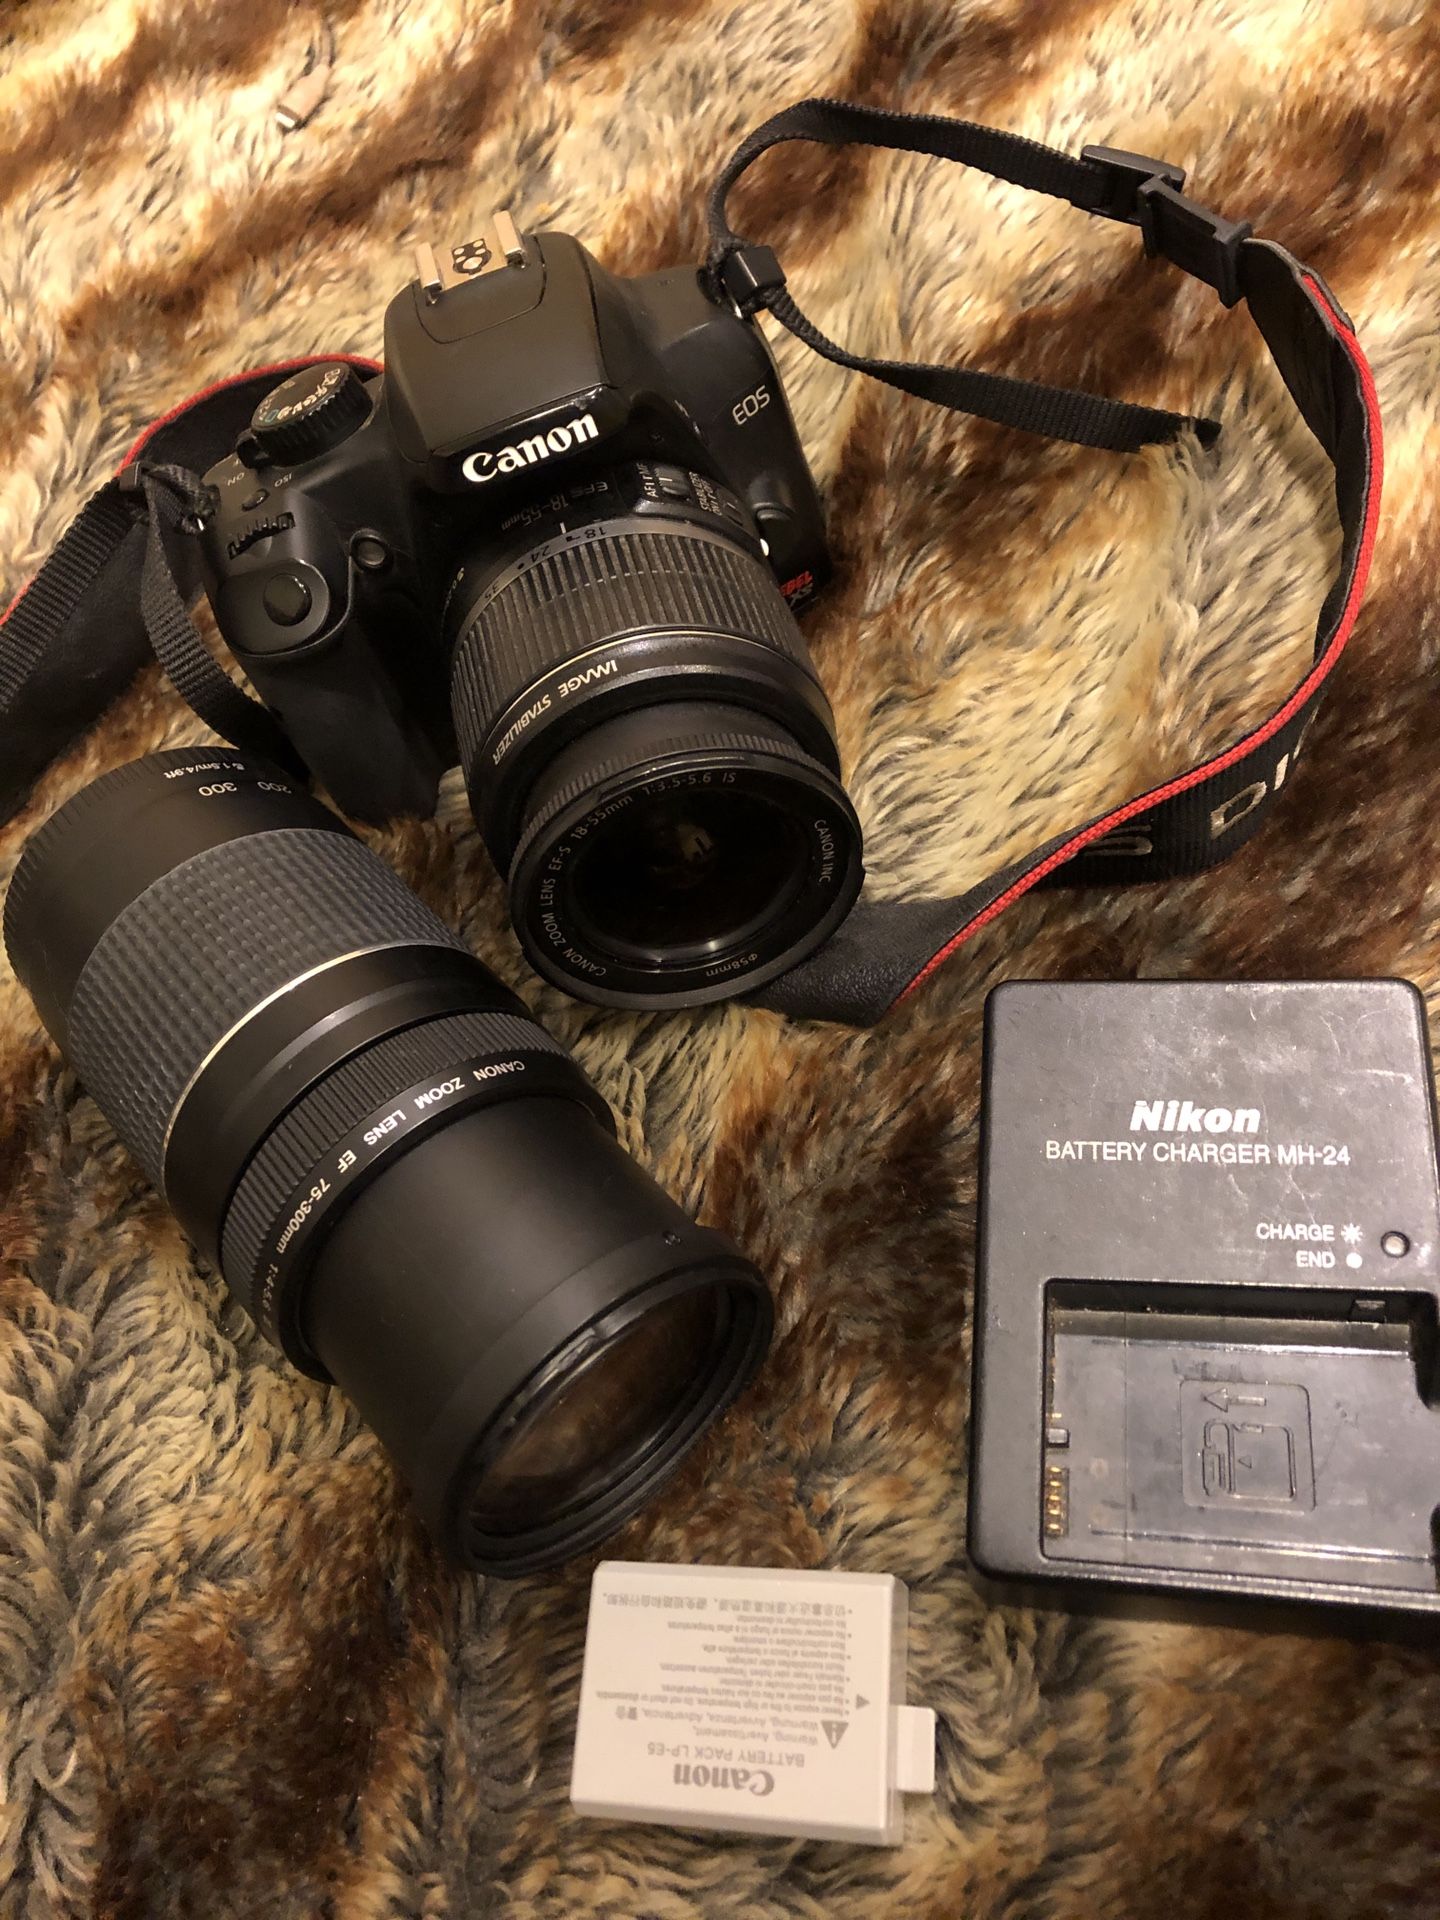 Canon EOS Rebel with multiple lenses